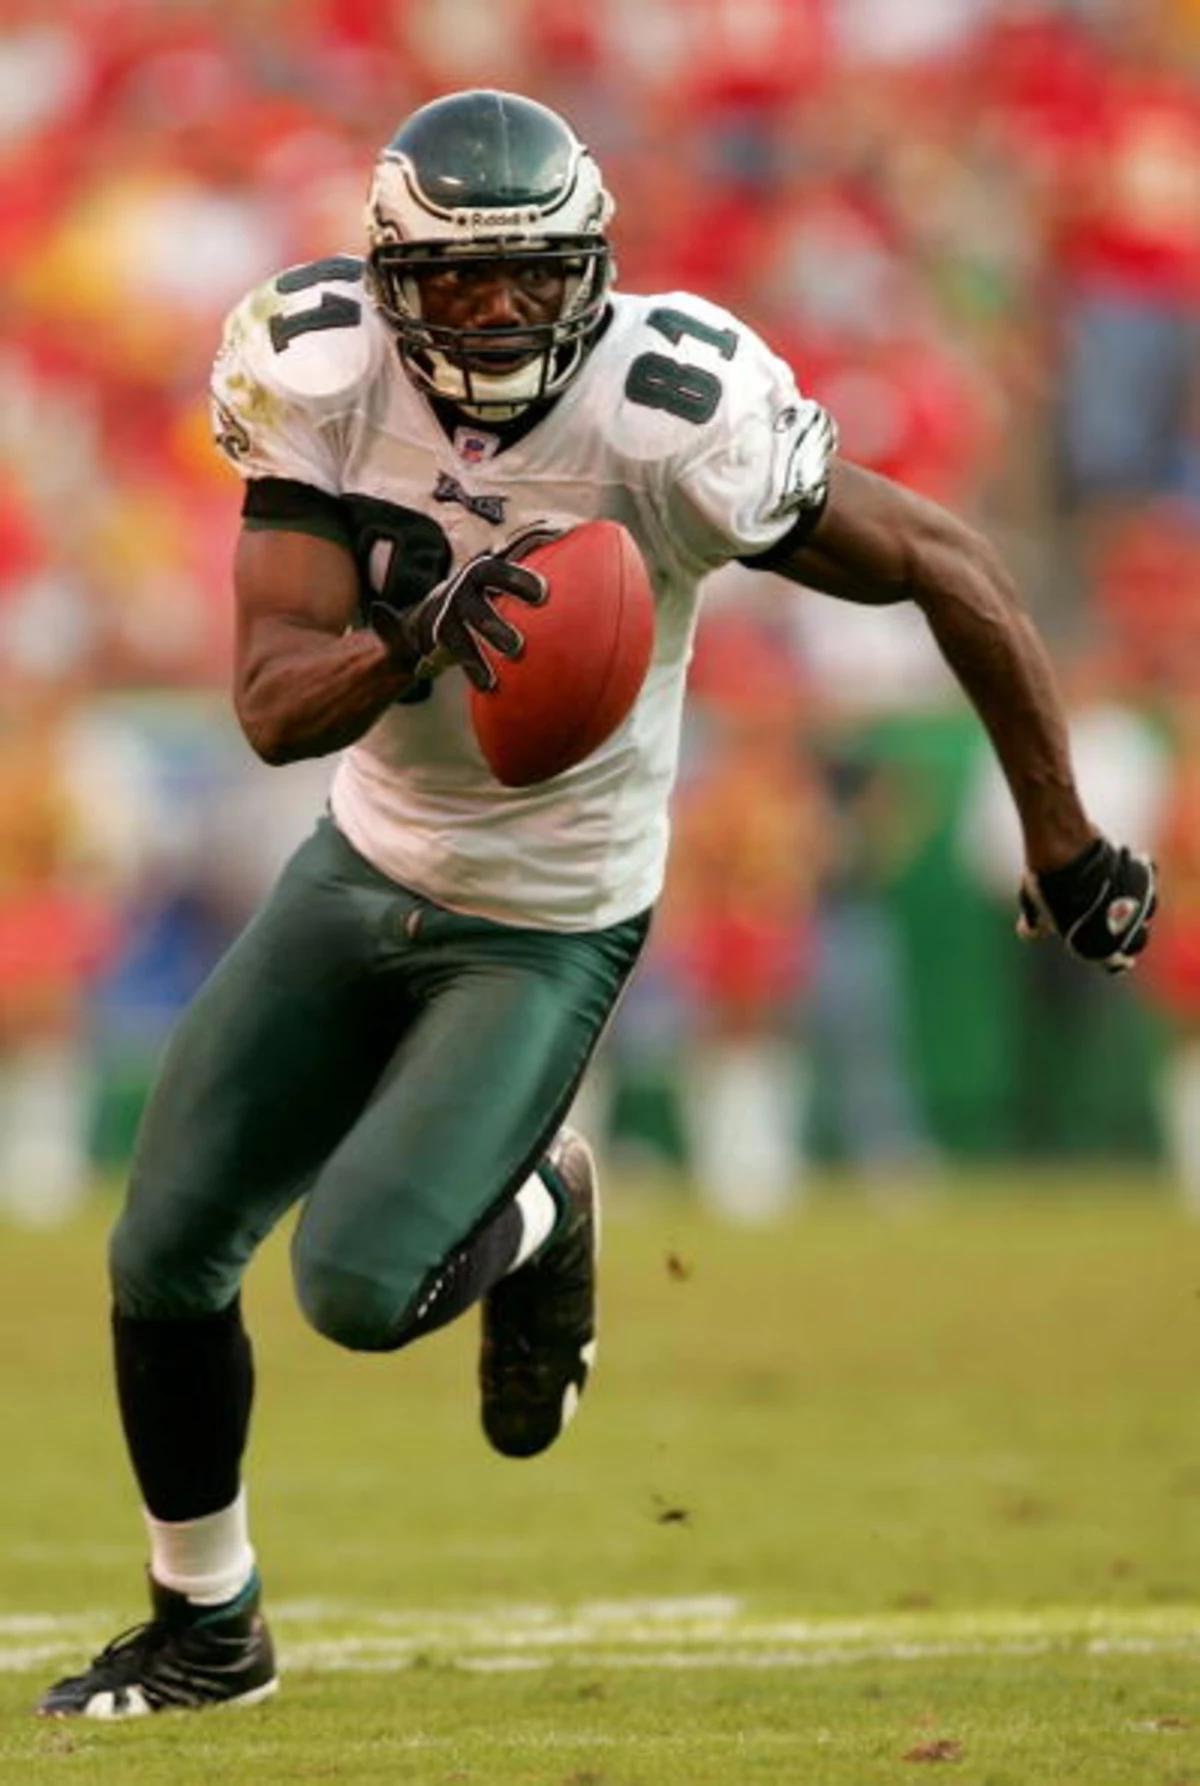 When Terrell Owens was with the Philadelphia Eagles, when and